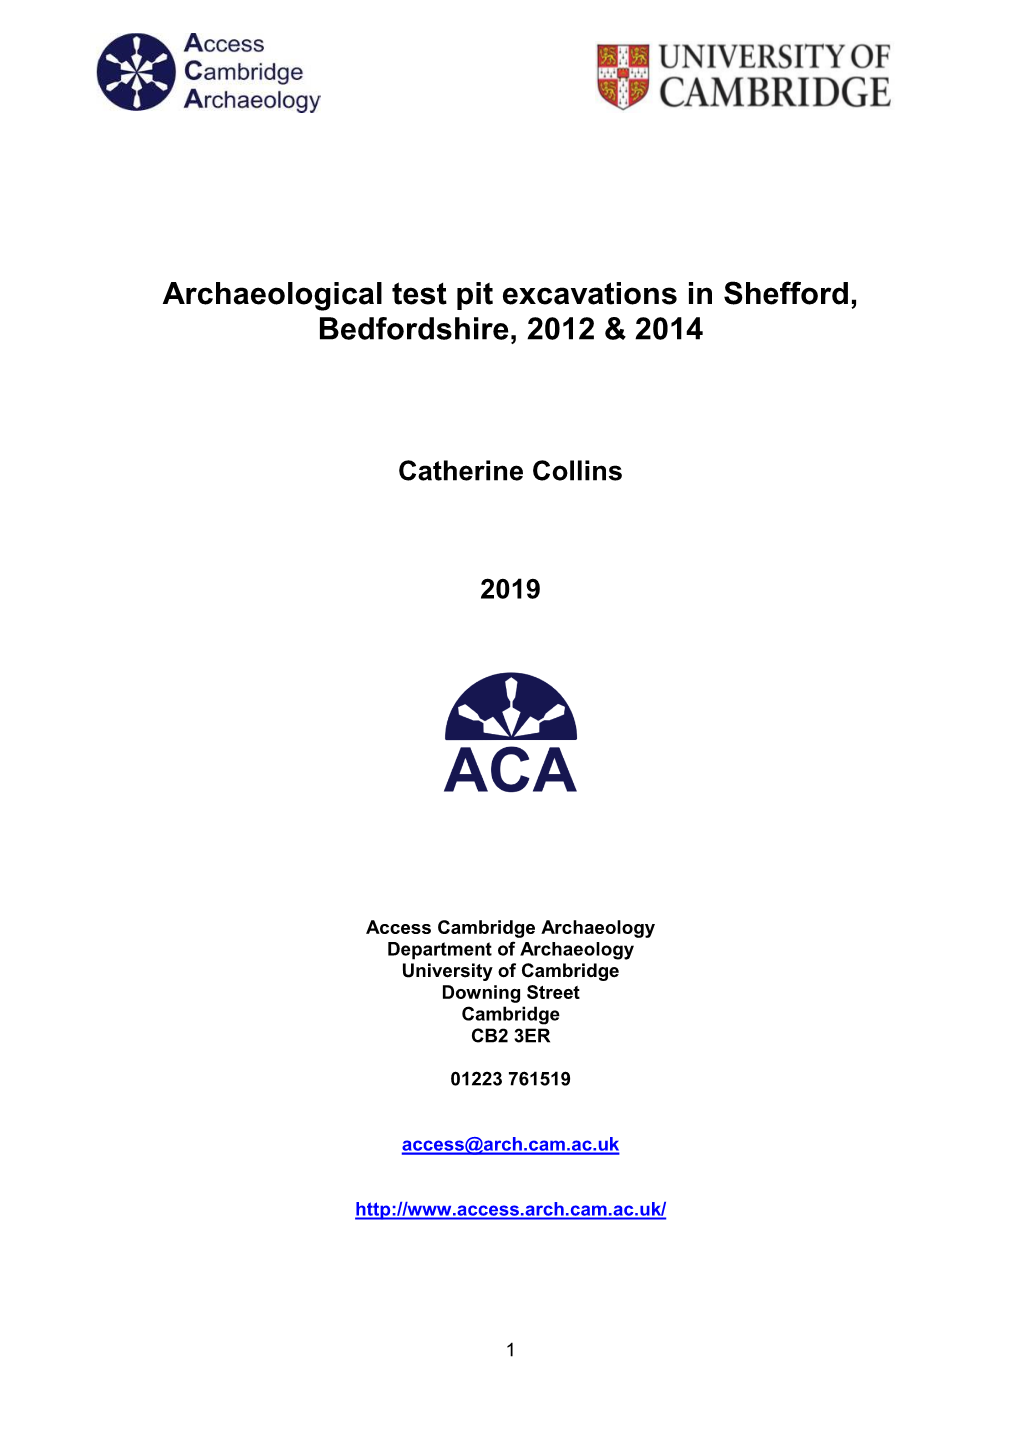 Archaeological Test Pit Excavations in Shefford, Bedfordshire, 2012 & 2014